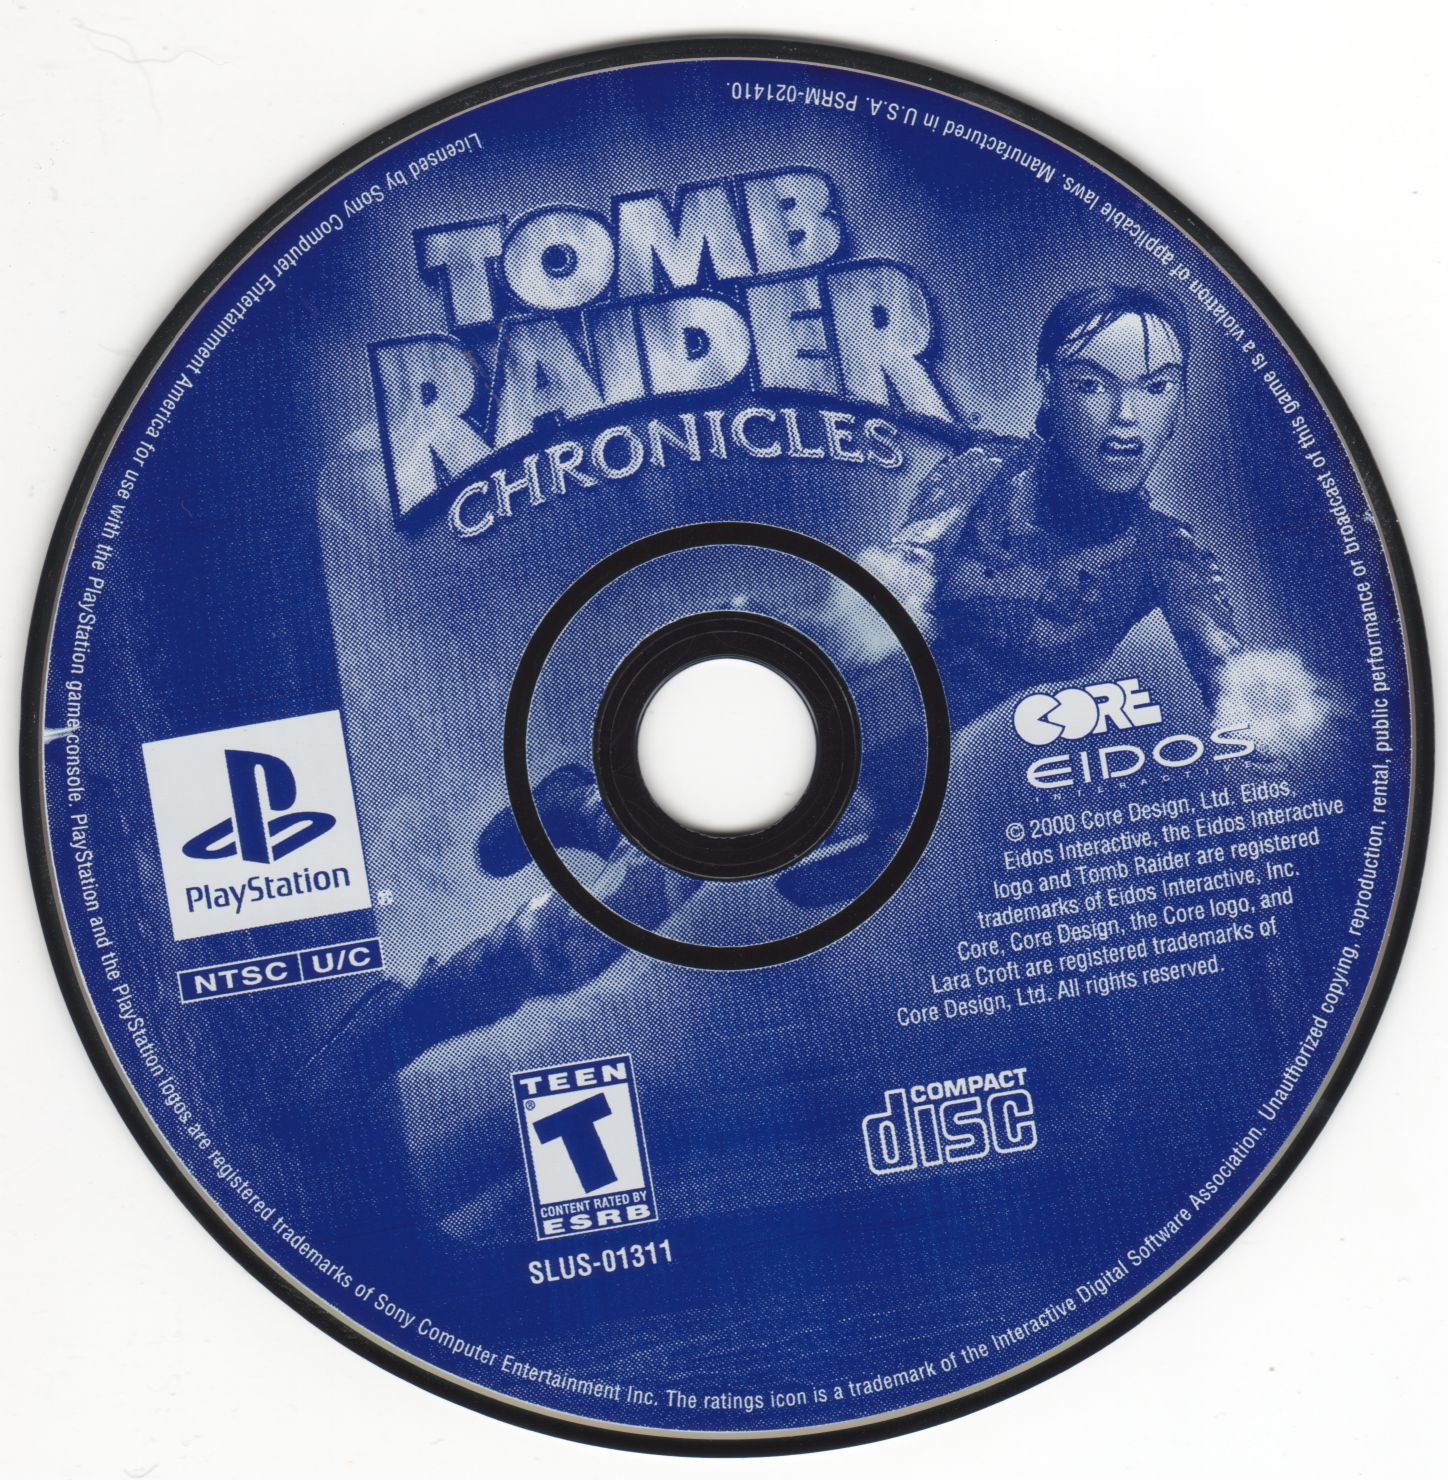 Tomb Raider Chronicles PSX cover